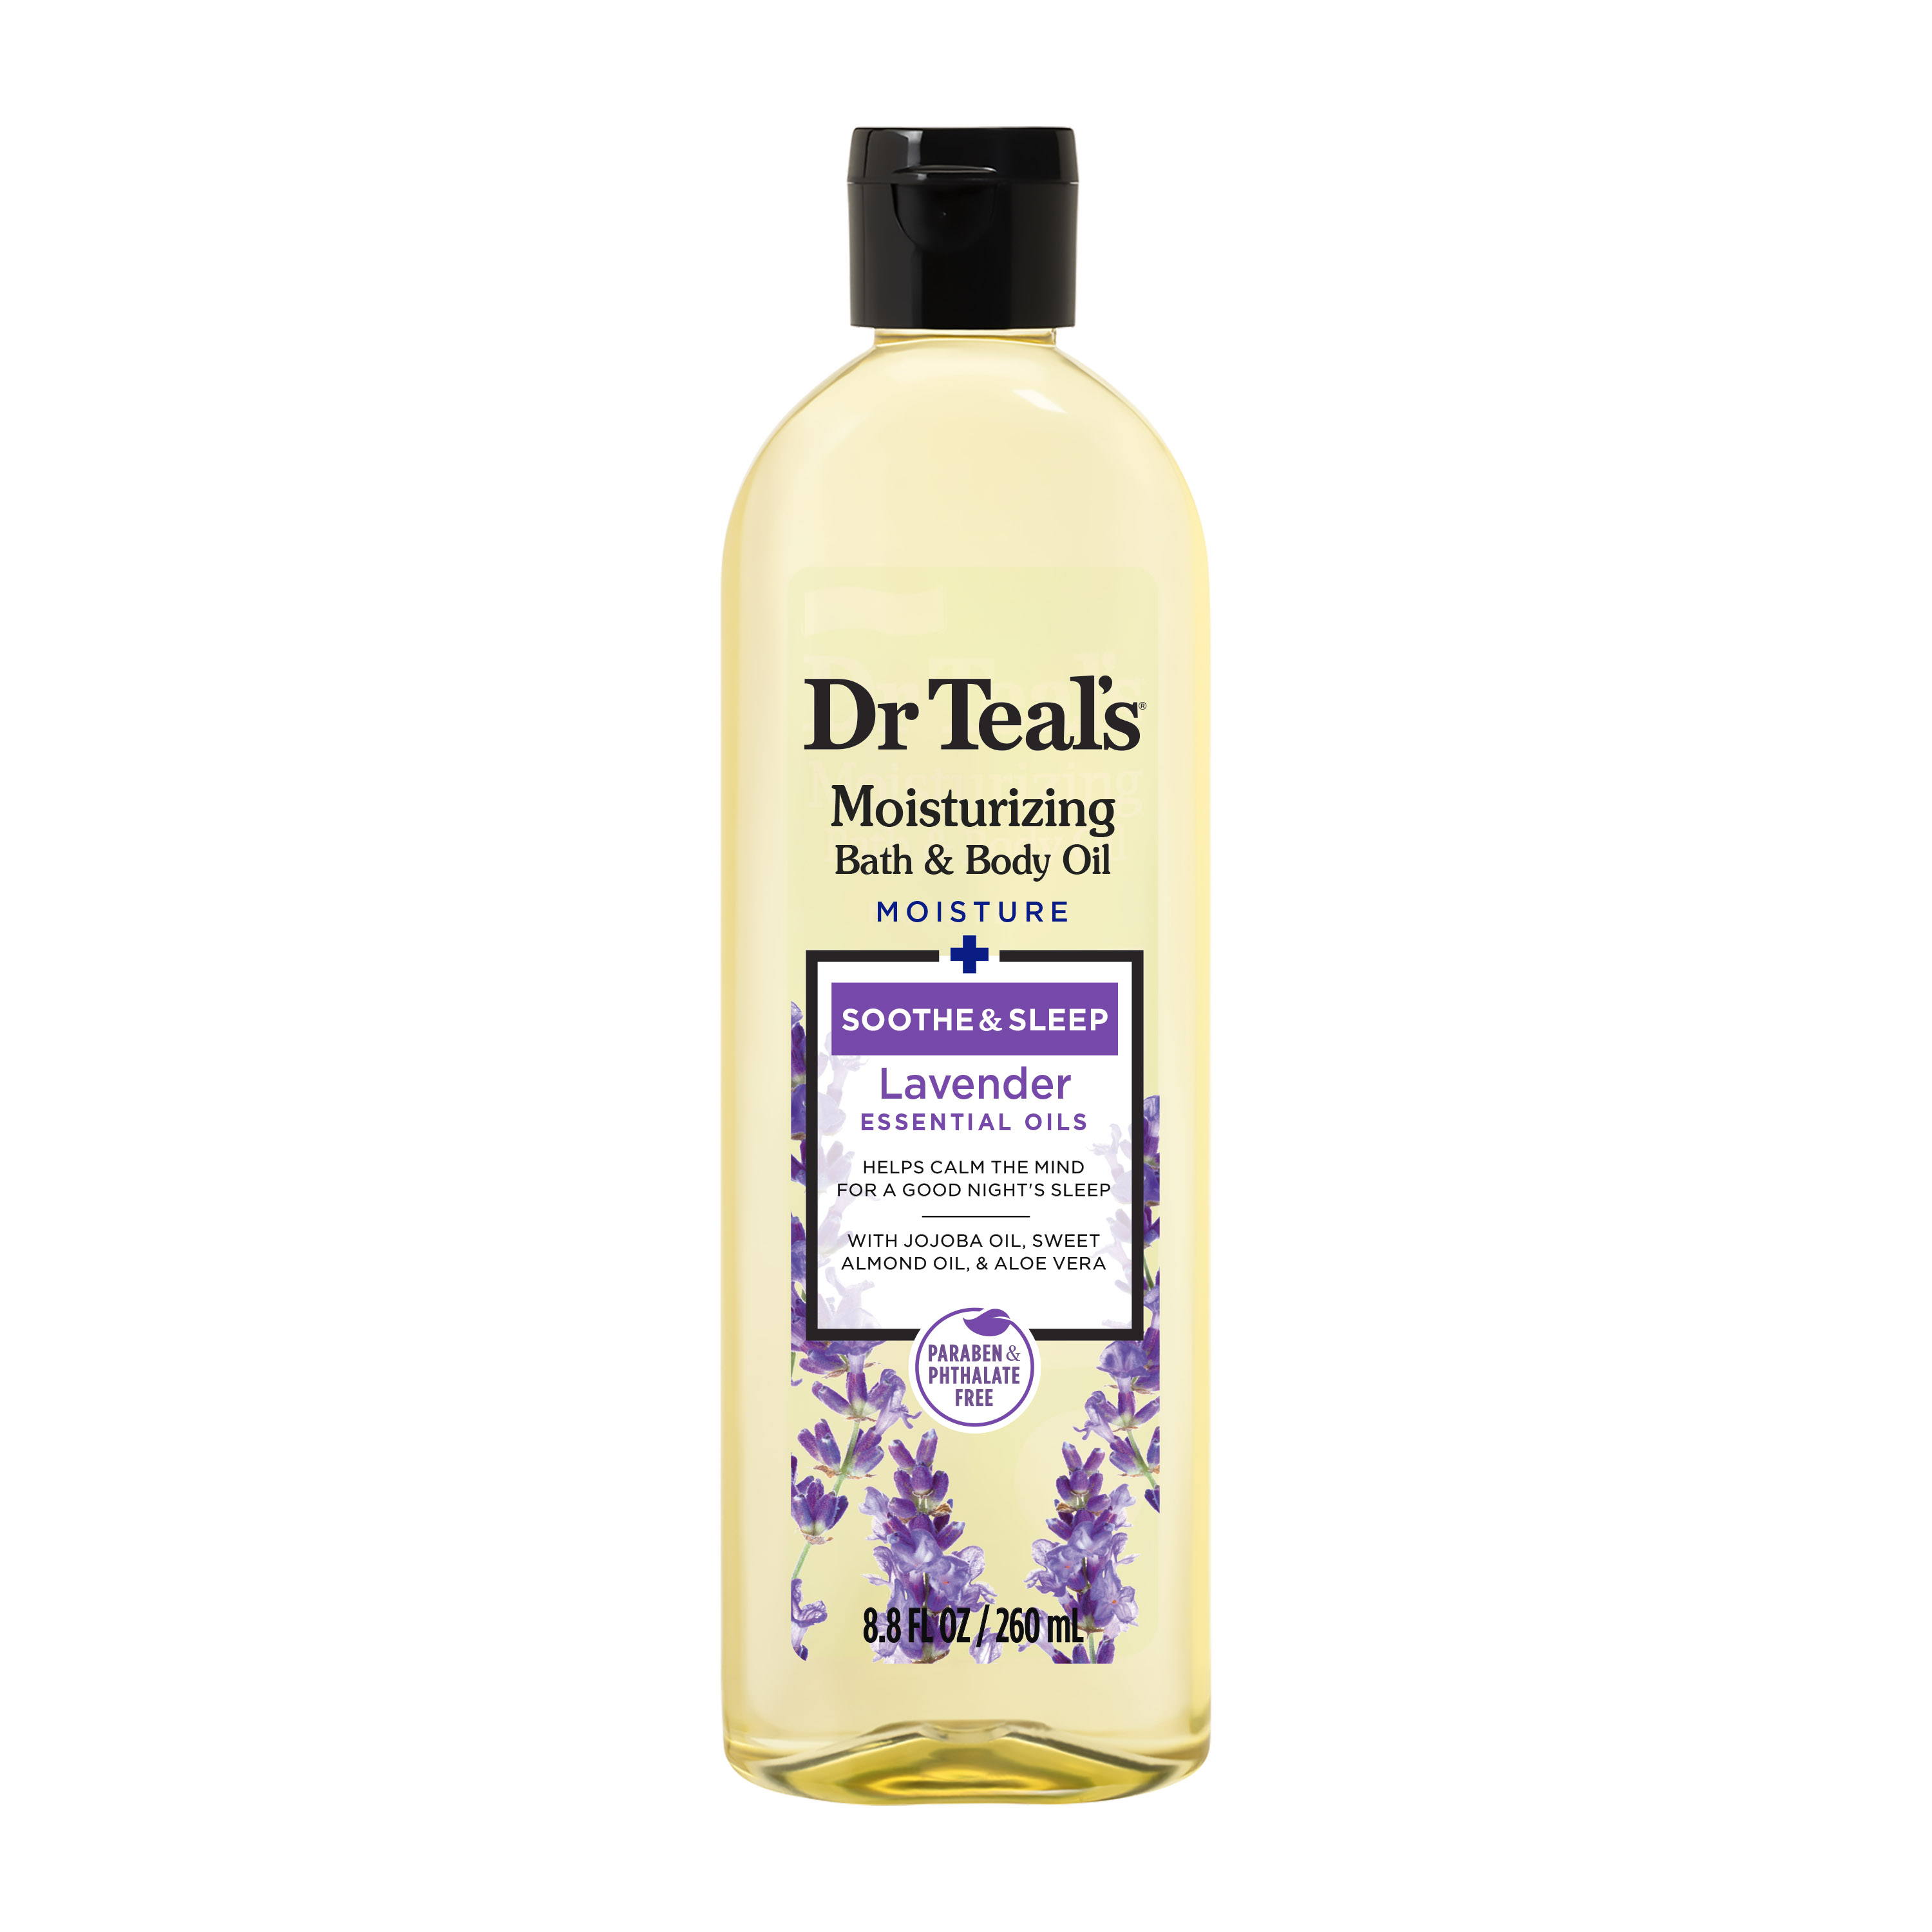 Dr Teal's Soothe & Sleep with Lavender Body and Bath Oil, 8.8 fl oz - image 1 of 8